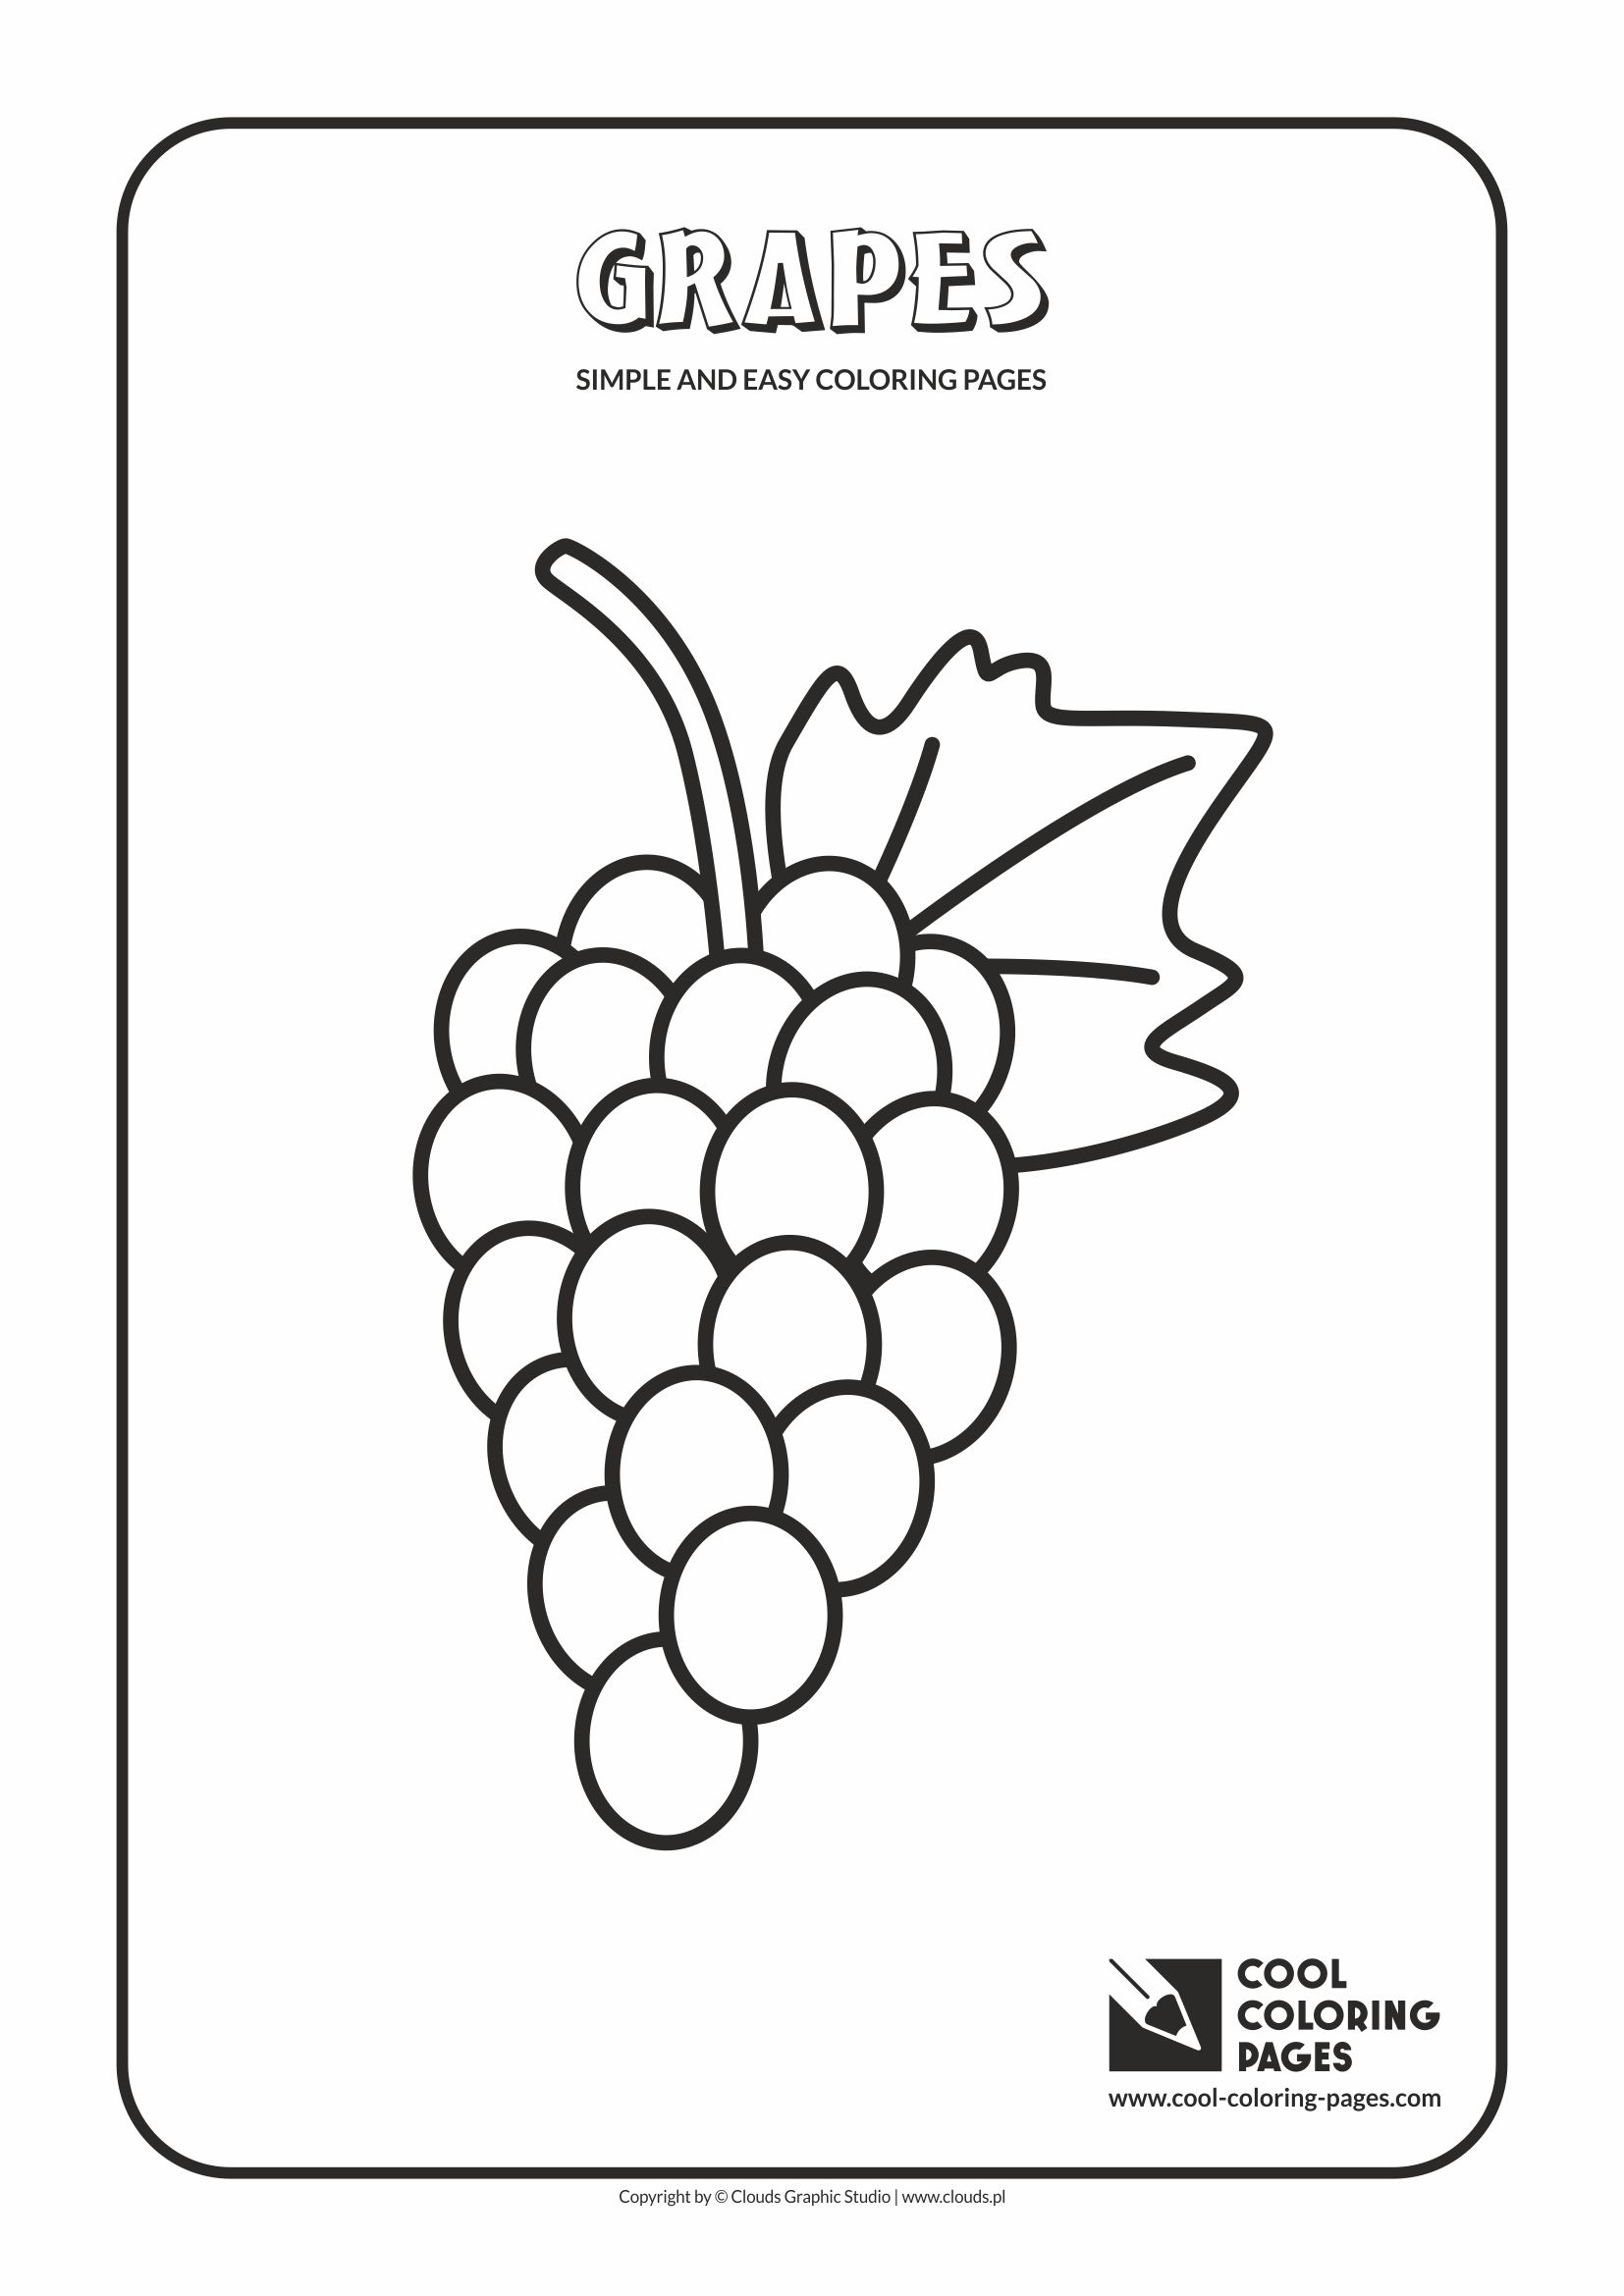 Cool coloring pages simple and easy coloring pages